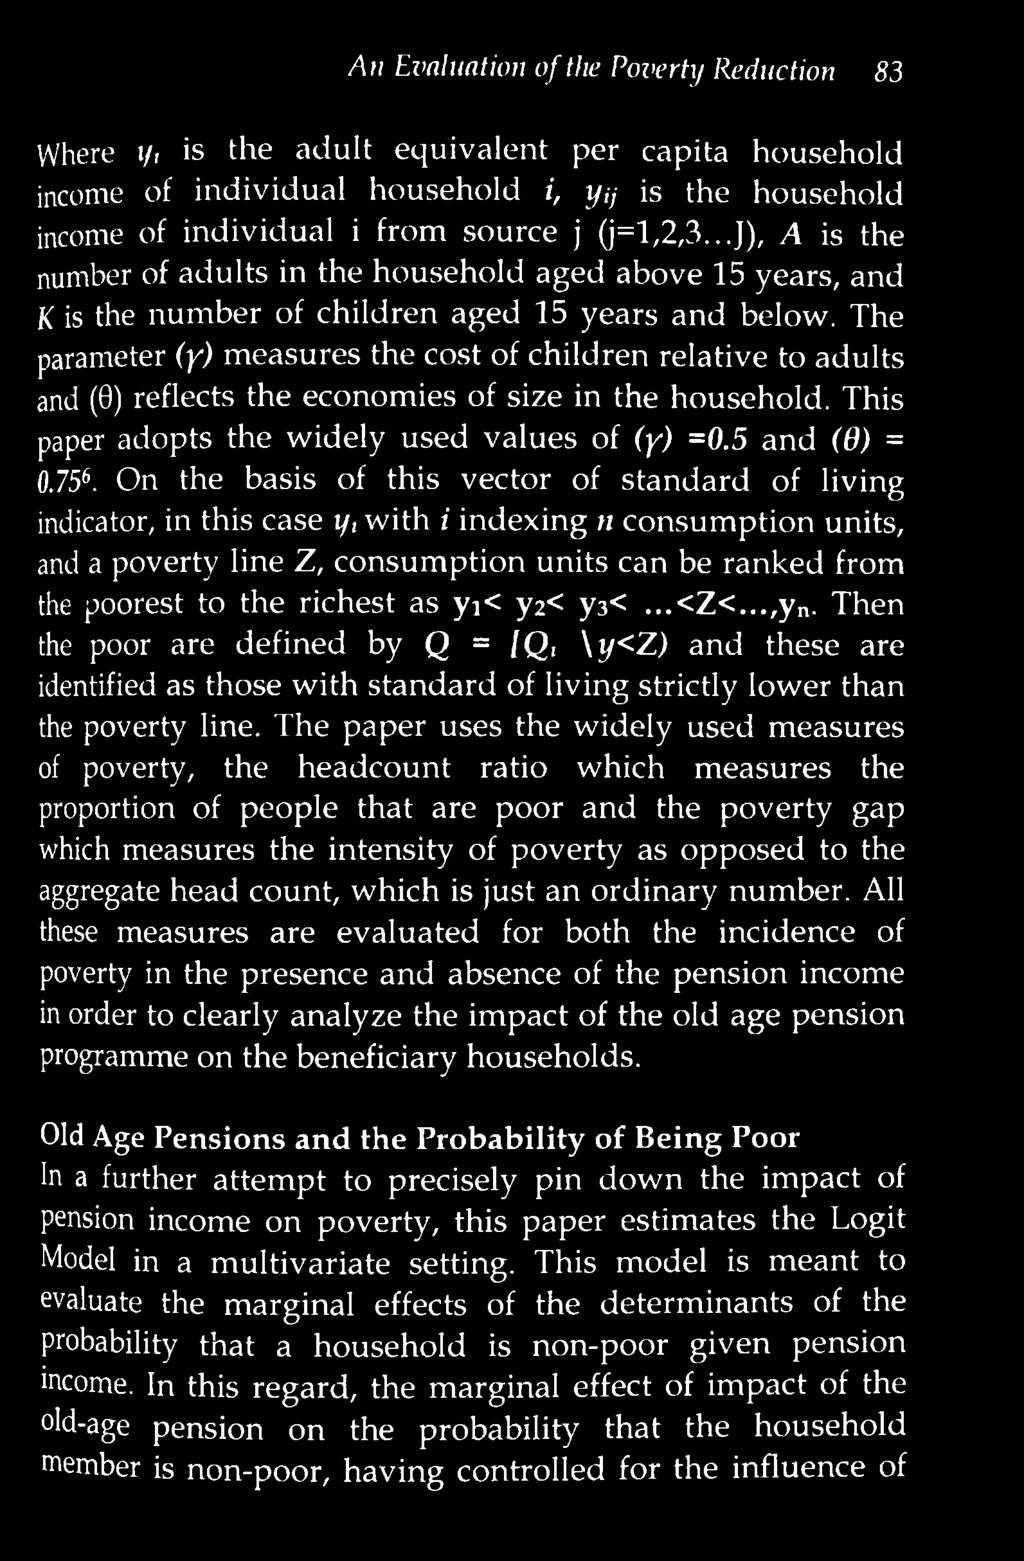 The parameter (y) m easures the cost of children relative to adults and (0) reflects the econom ies of size in the household. This paper adopts the widely used values of (y) =0.5 and (6) = 0.756.